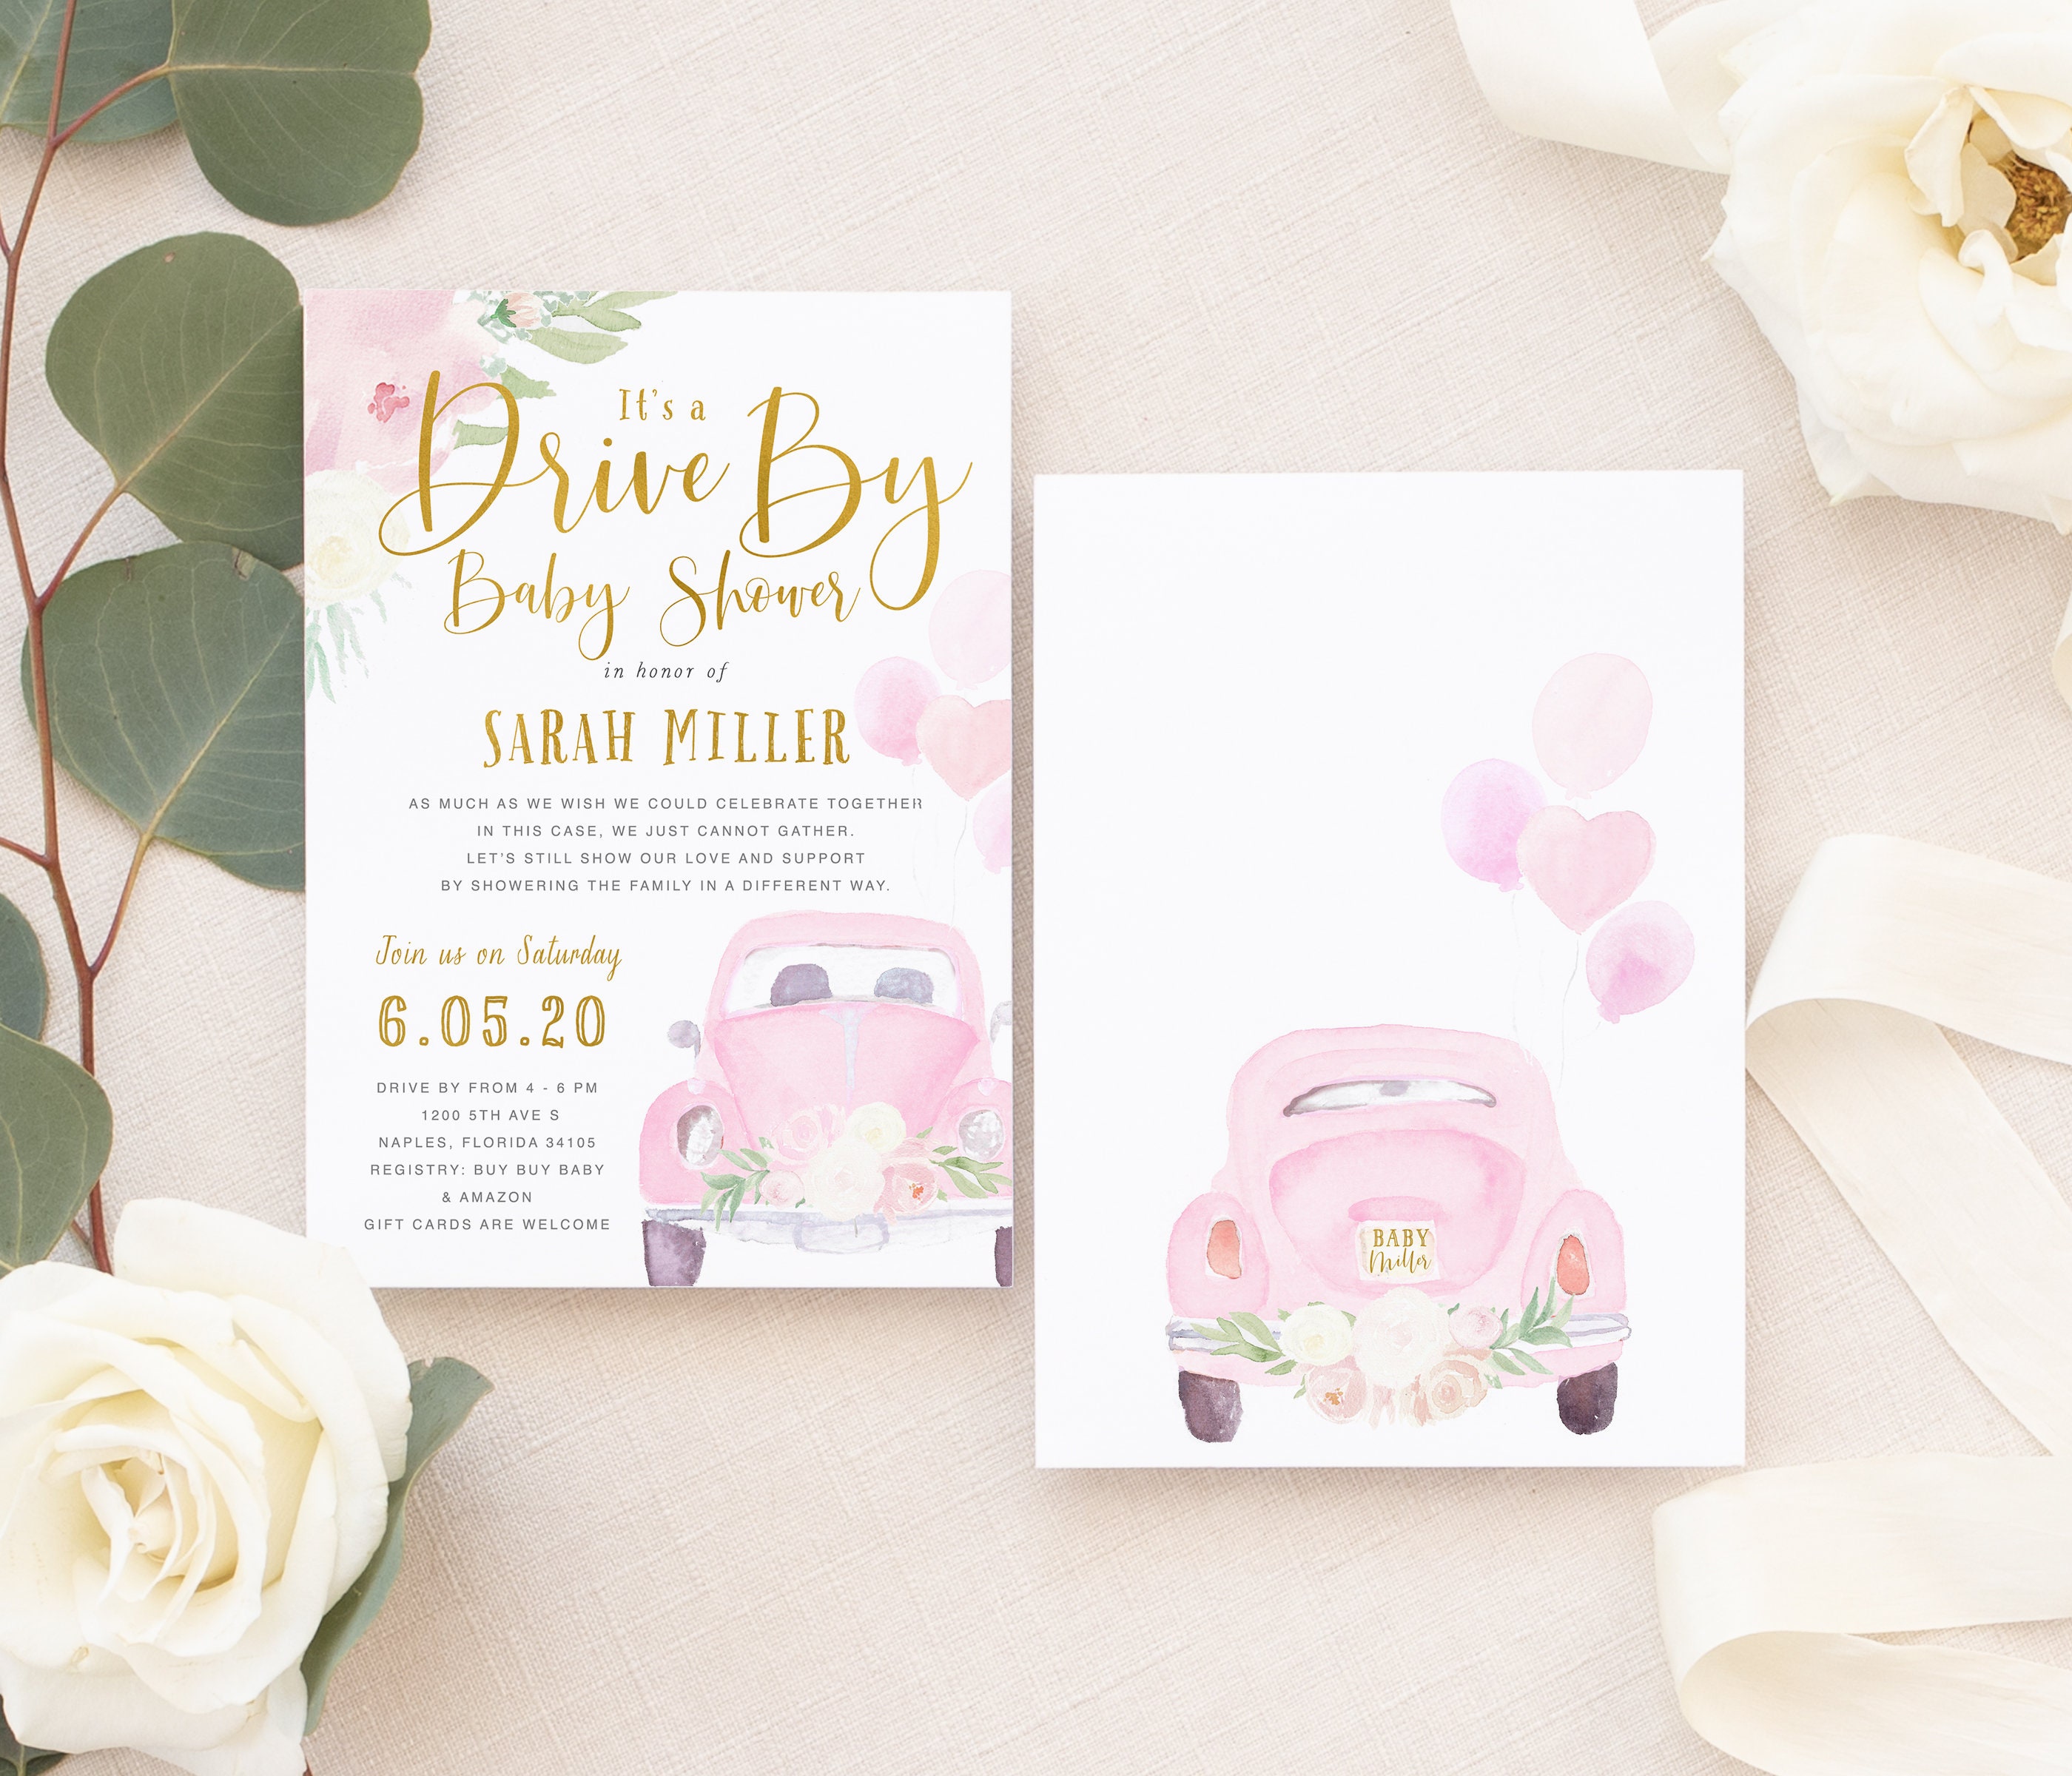 Drive By Baby Shower Invitation, Up Through Car Parade Invitation